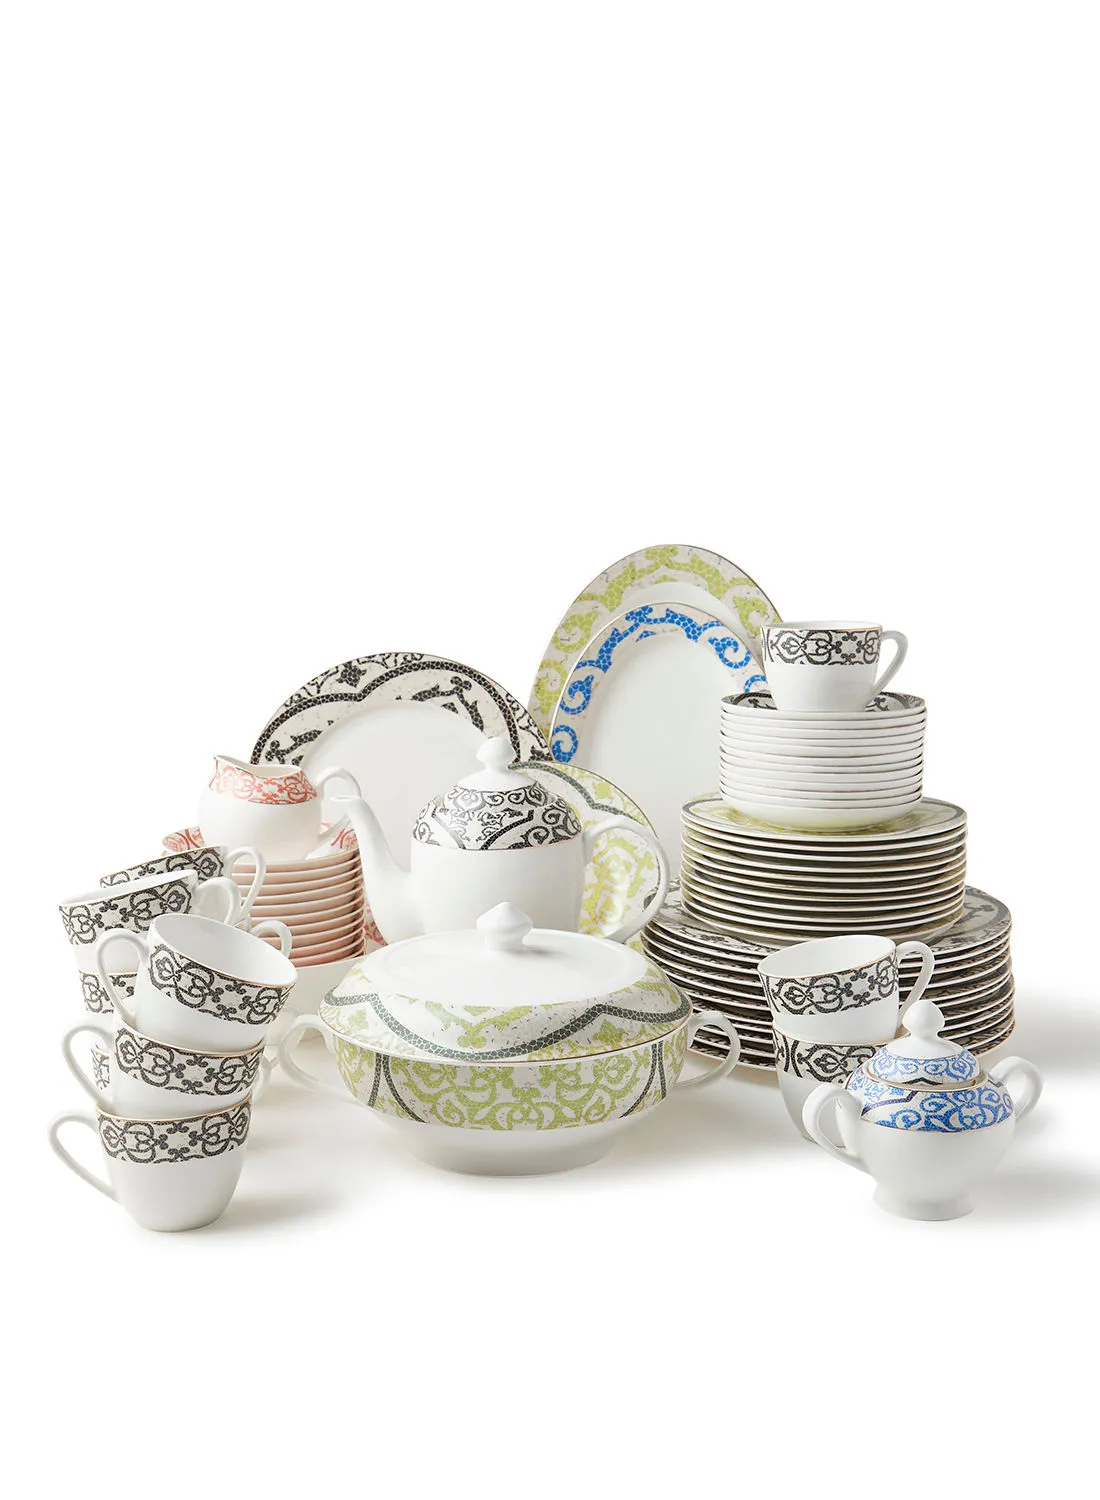 noon east 70 Piece Ceramic Dinner Set Premium Quality - Dishes, Plates - Dinner Plate, Side Plate, Bowl, Cups, Serving Dish And Bowl - Serves 12 - Festive Design Vivid Mosaic